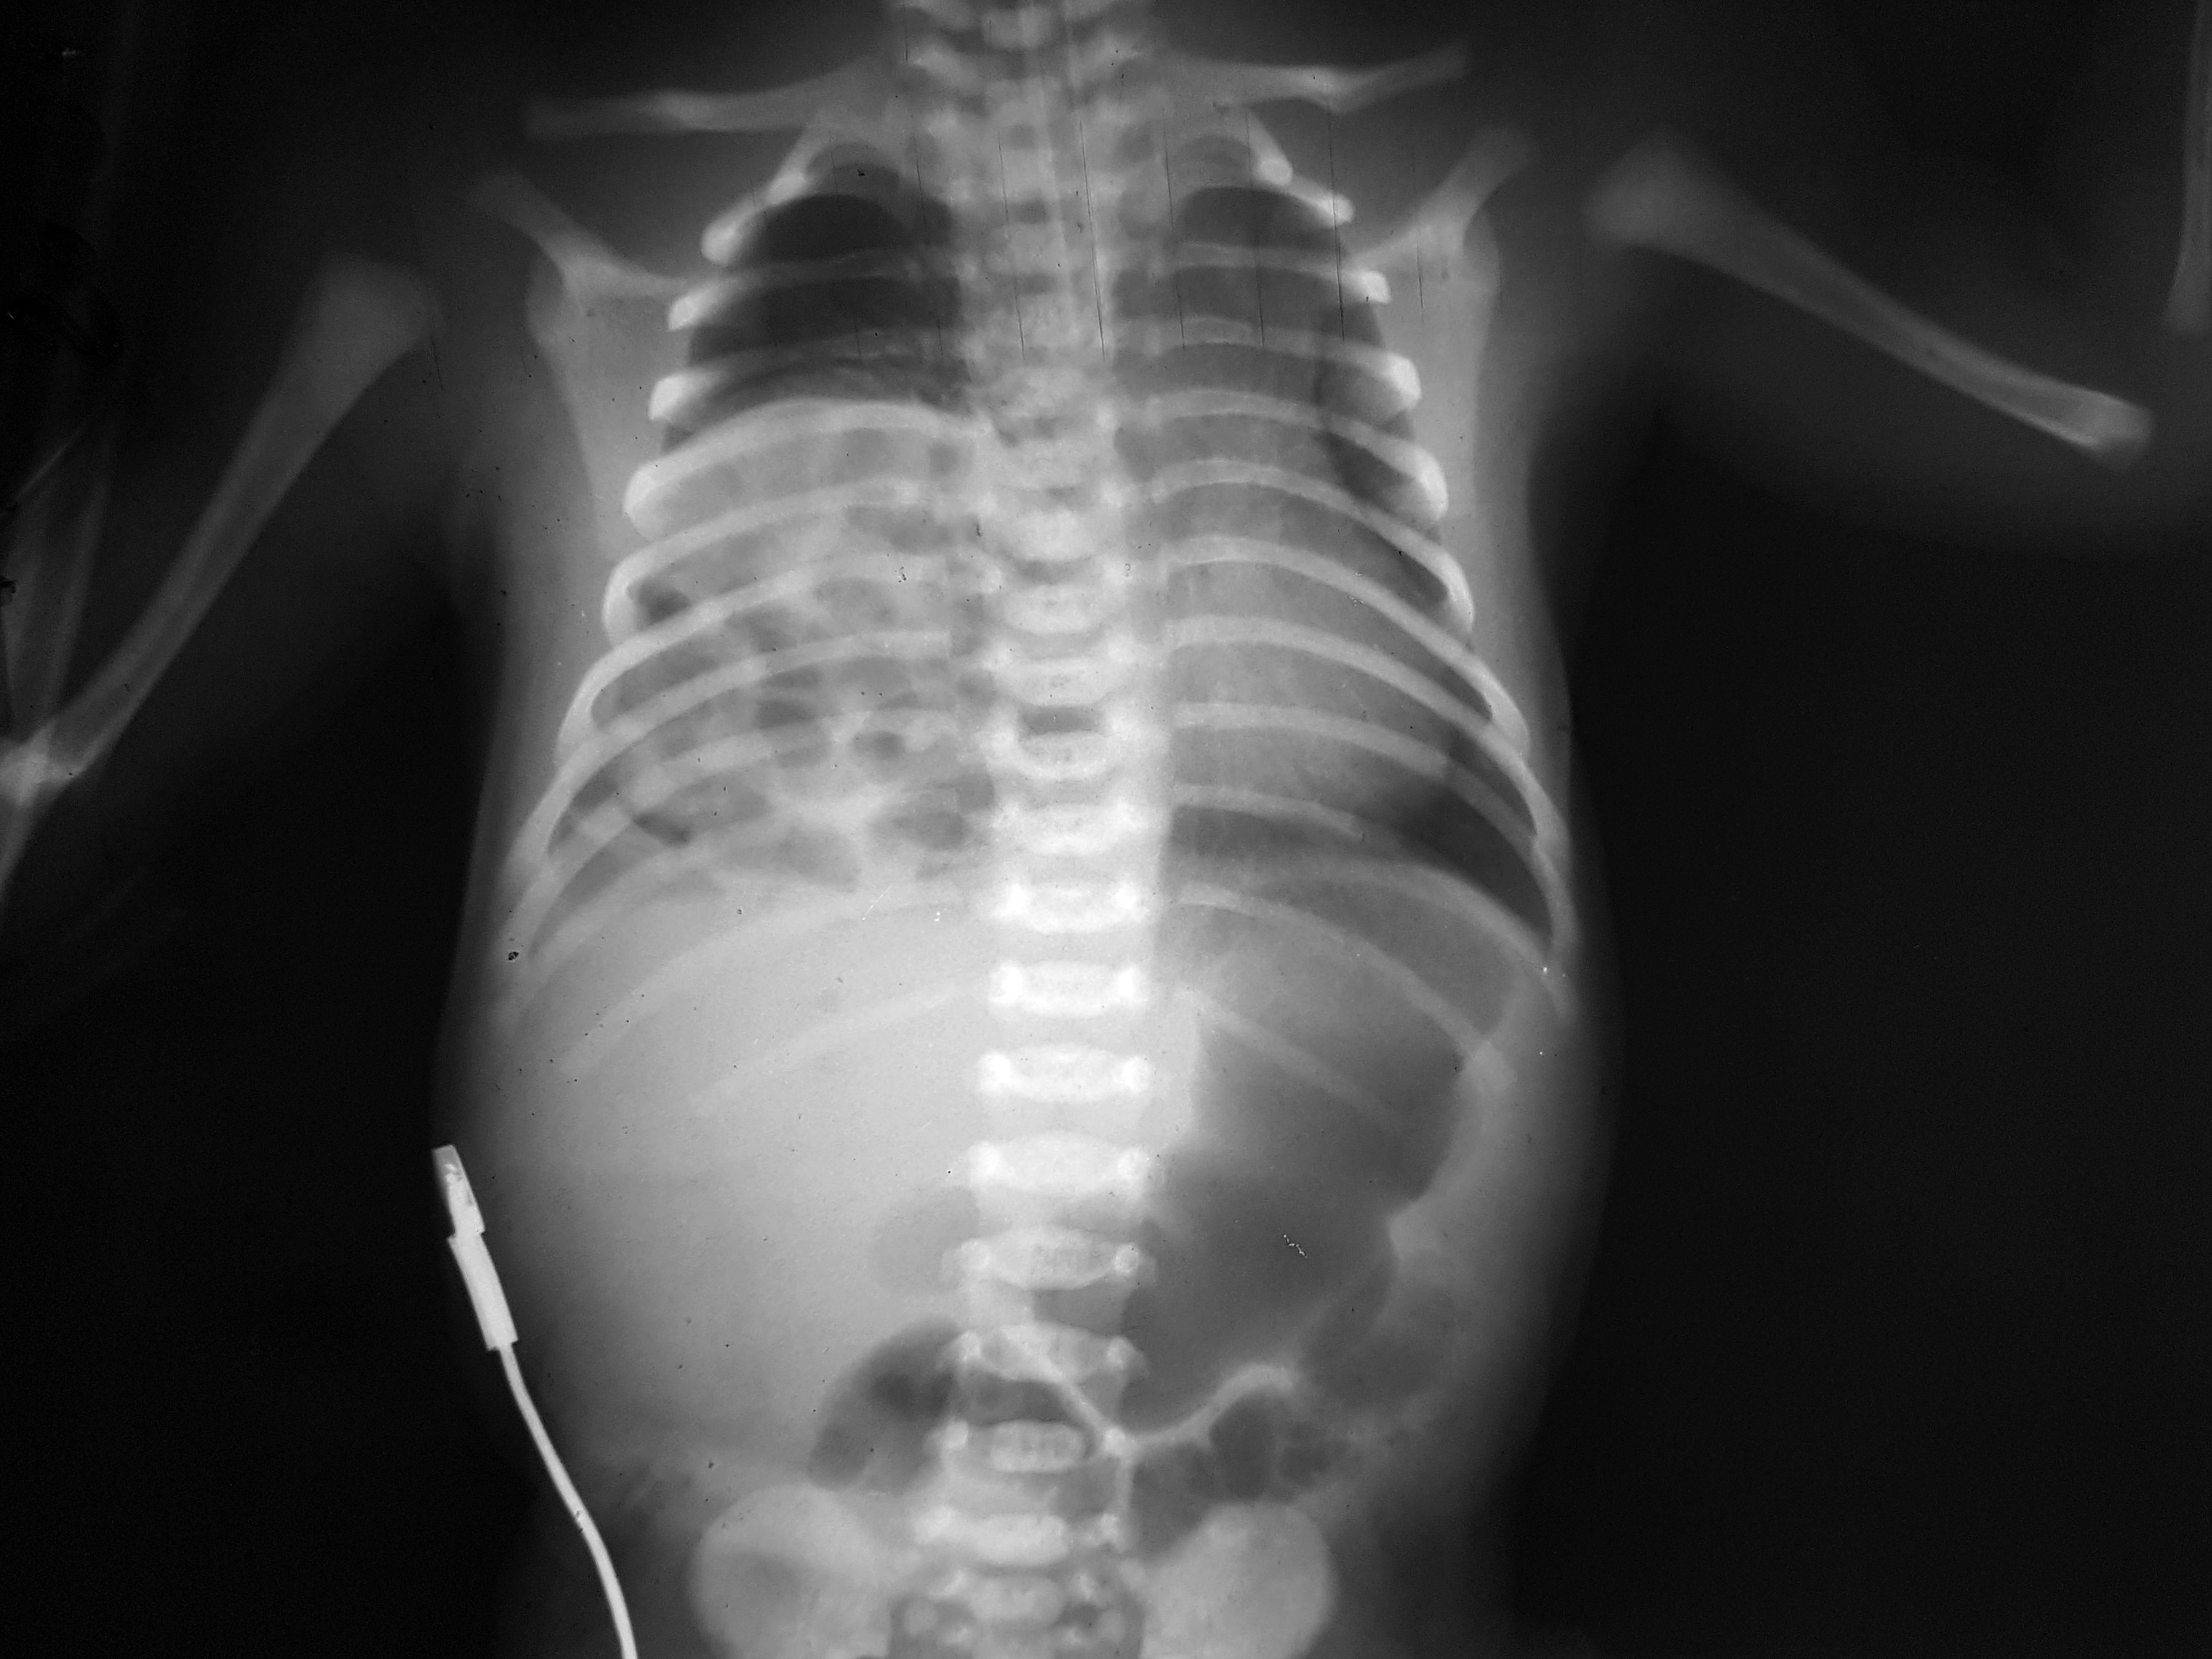 Figure 1A. Chest radiograph showing the cyst-like aspect in the right hemithorax, suggestive for bowel loops